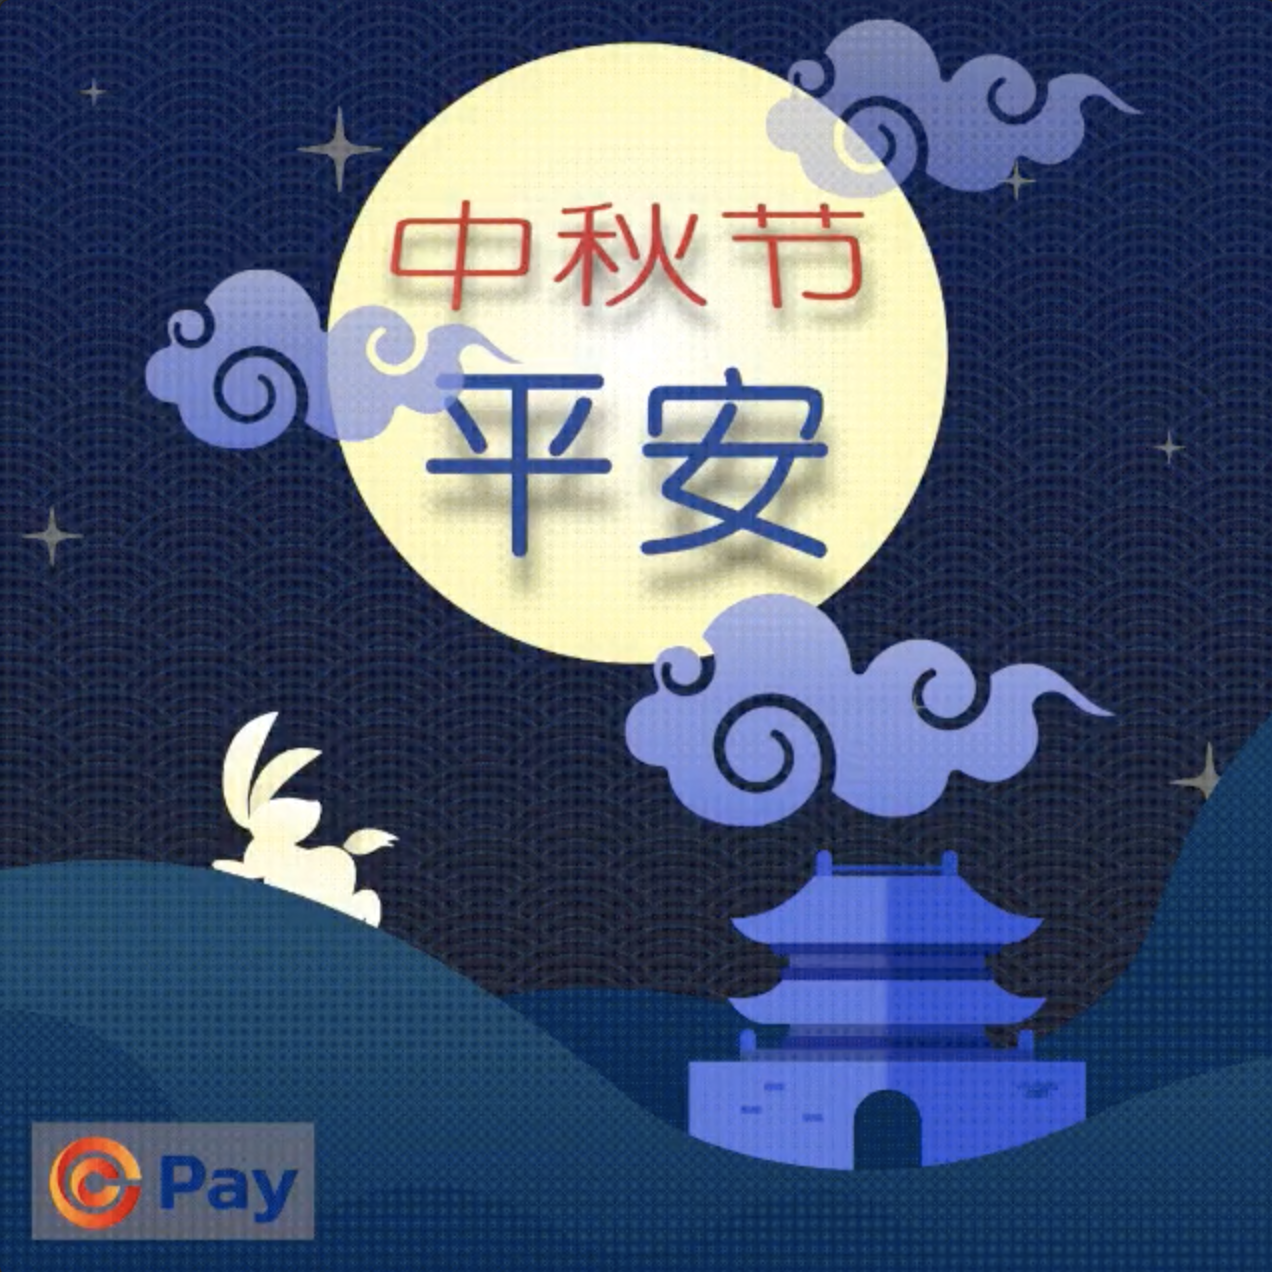 Settlement Delay Notification During Mid-Autumn Festival and National Day in China